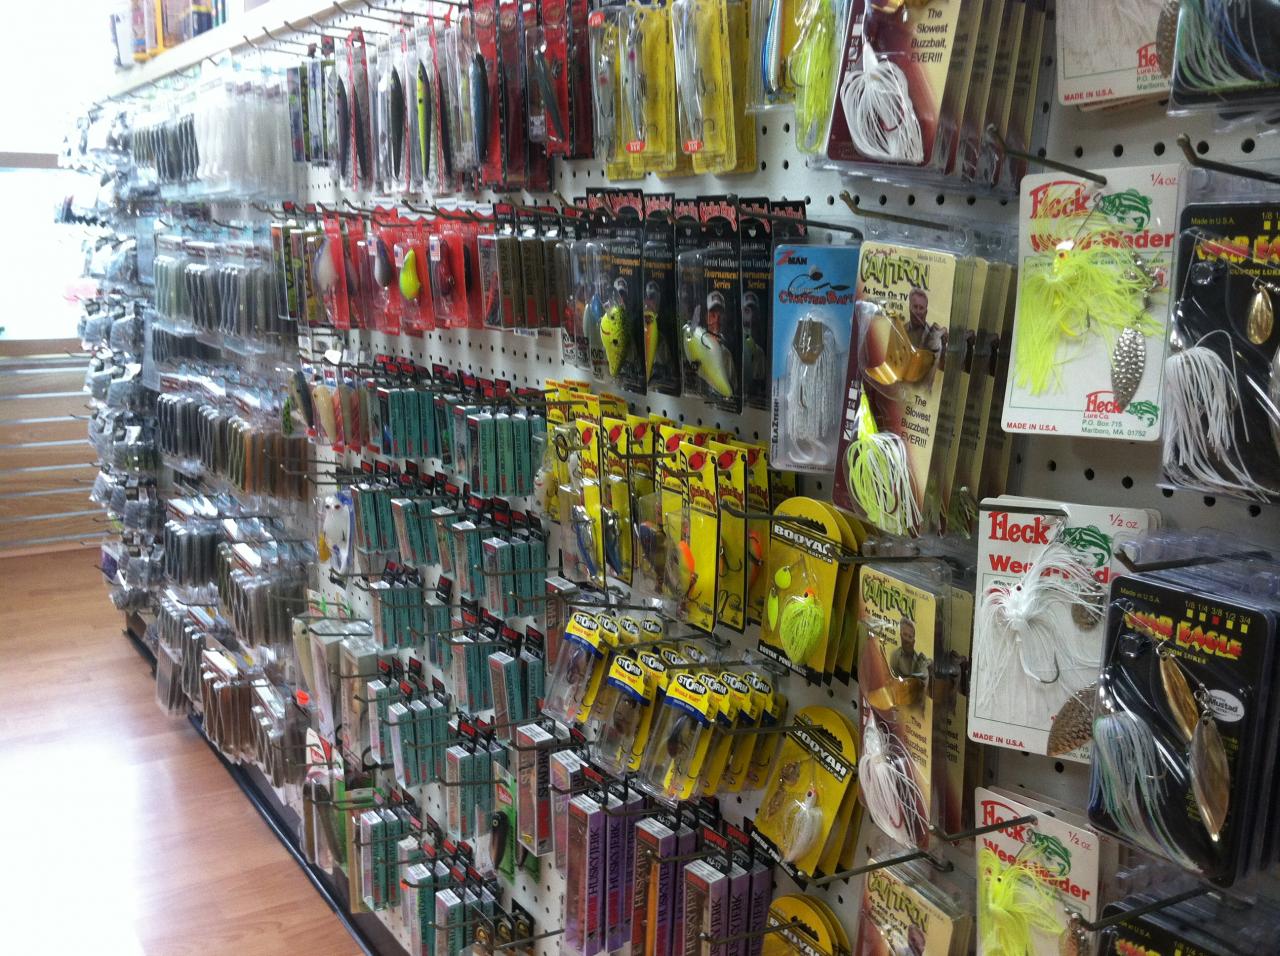 Candlewood Bait & Tackle: Buy Your Bait, Tackle & Gear Here in Danbury, CT